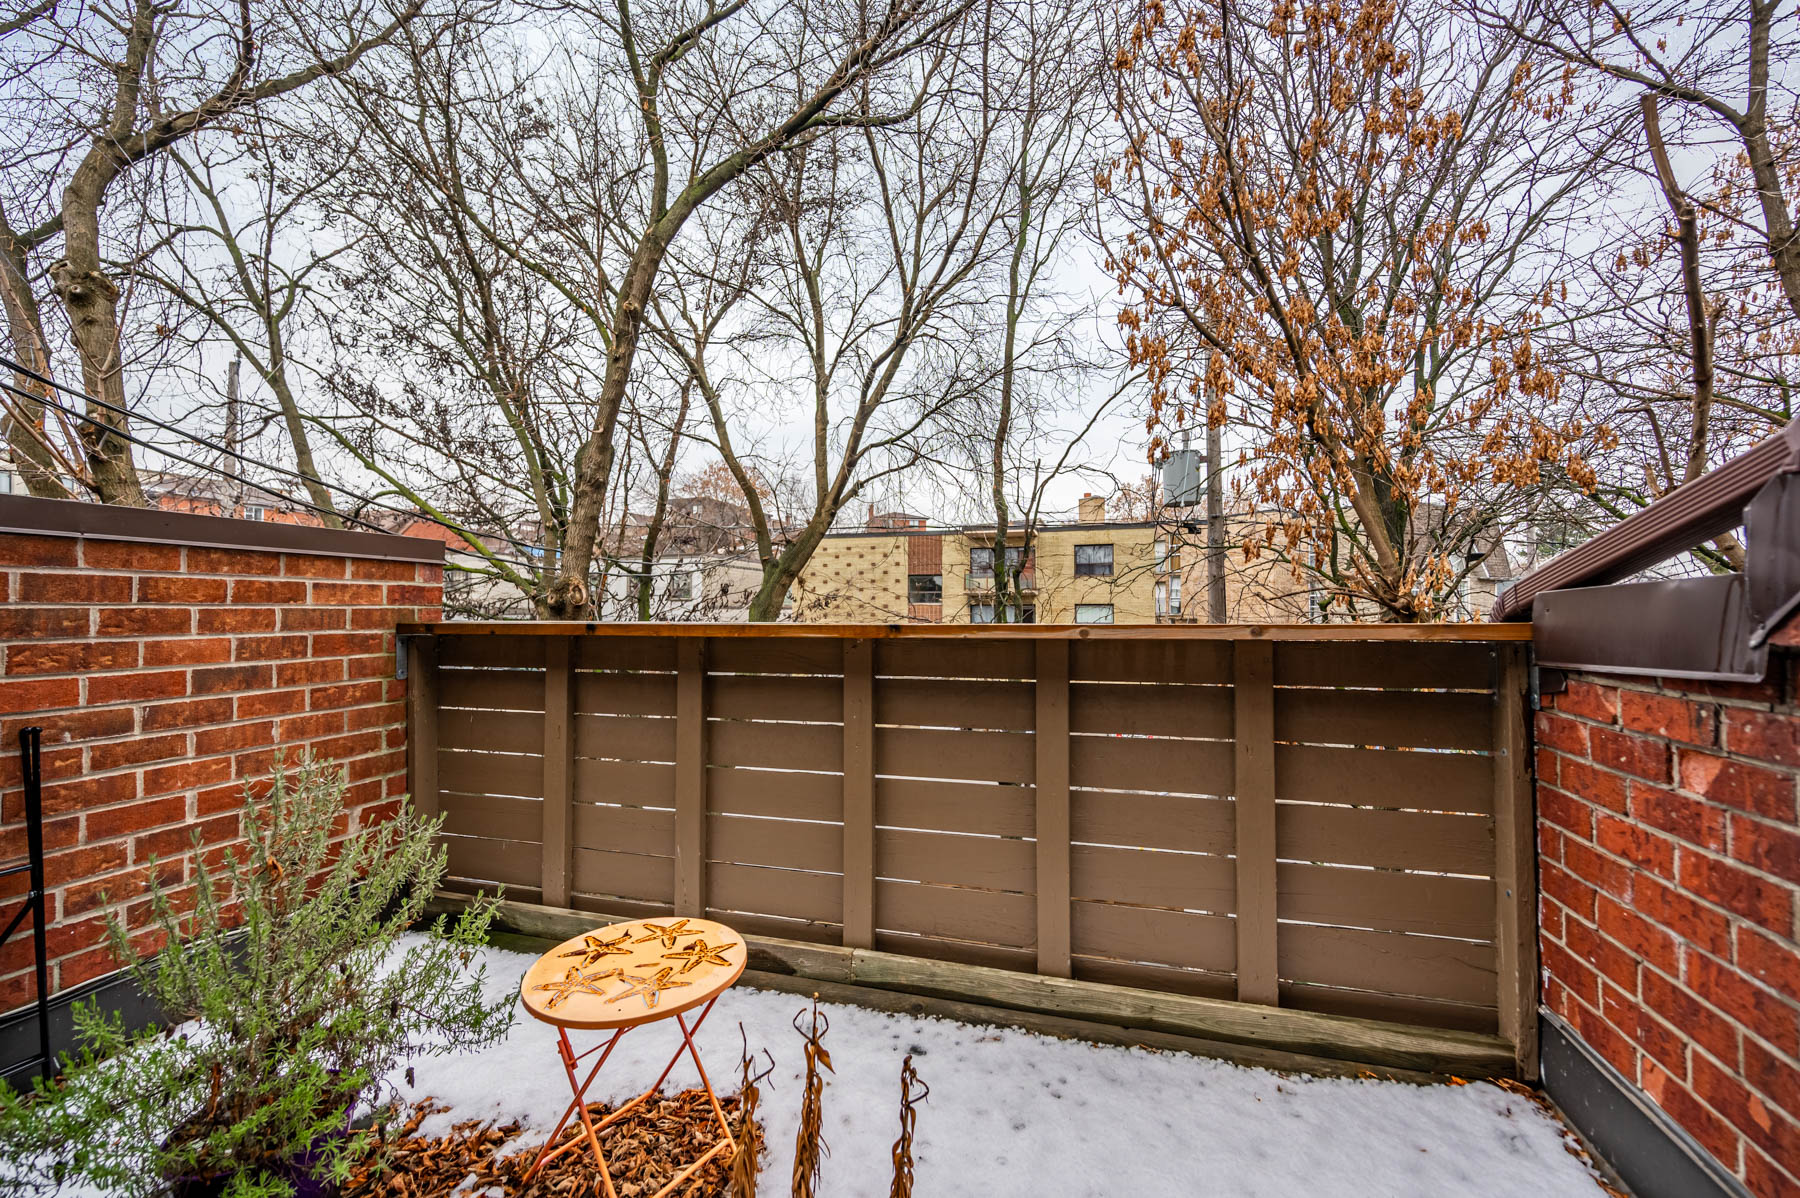 2133 Dufferin St – Second Floor Rental Unit E walk-out deck with red-brick wall and wood fence.